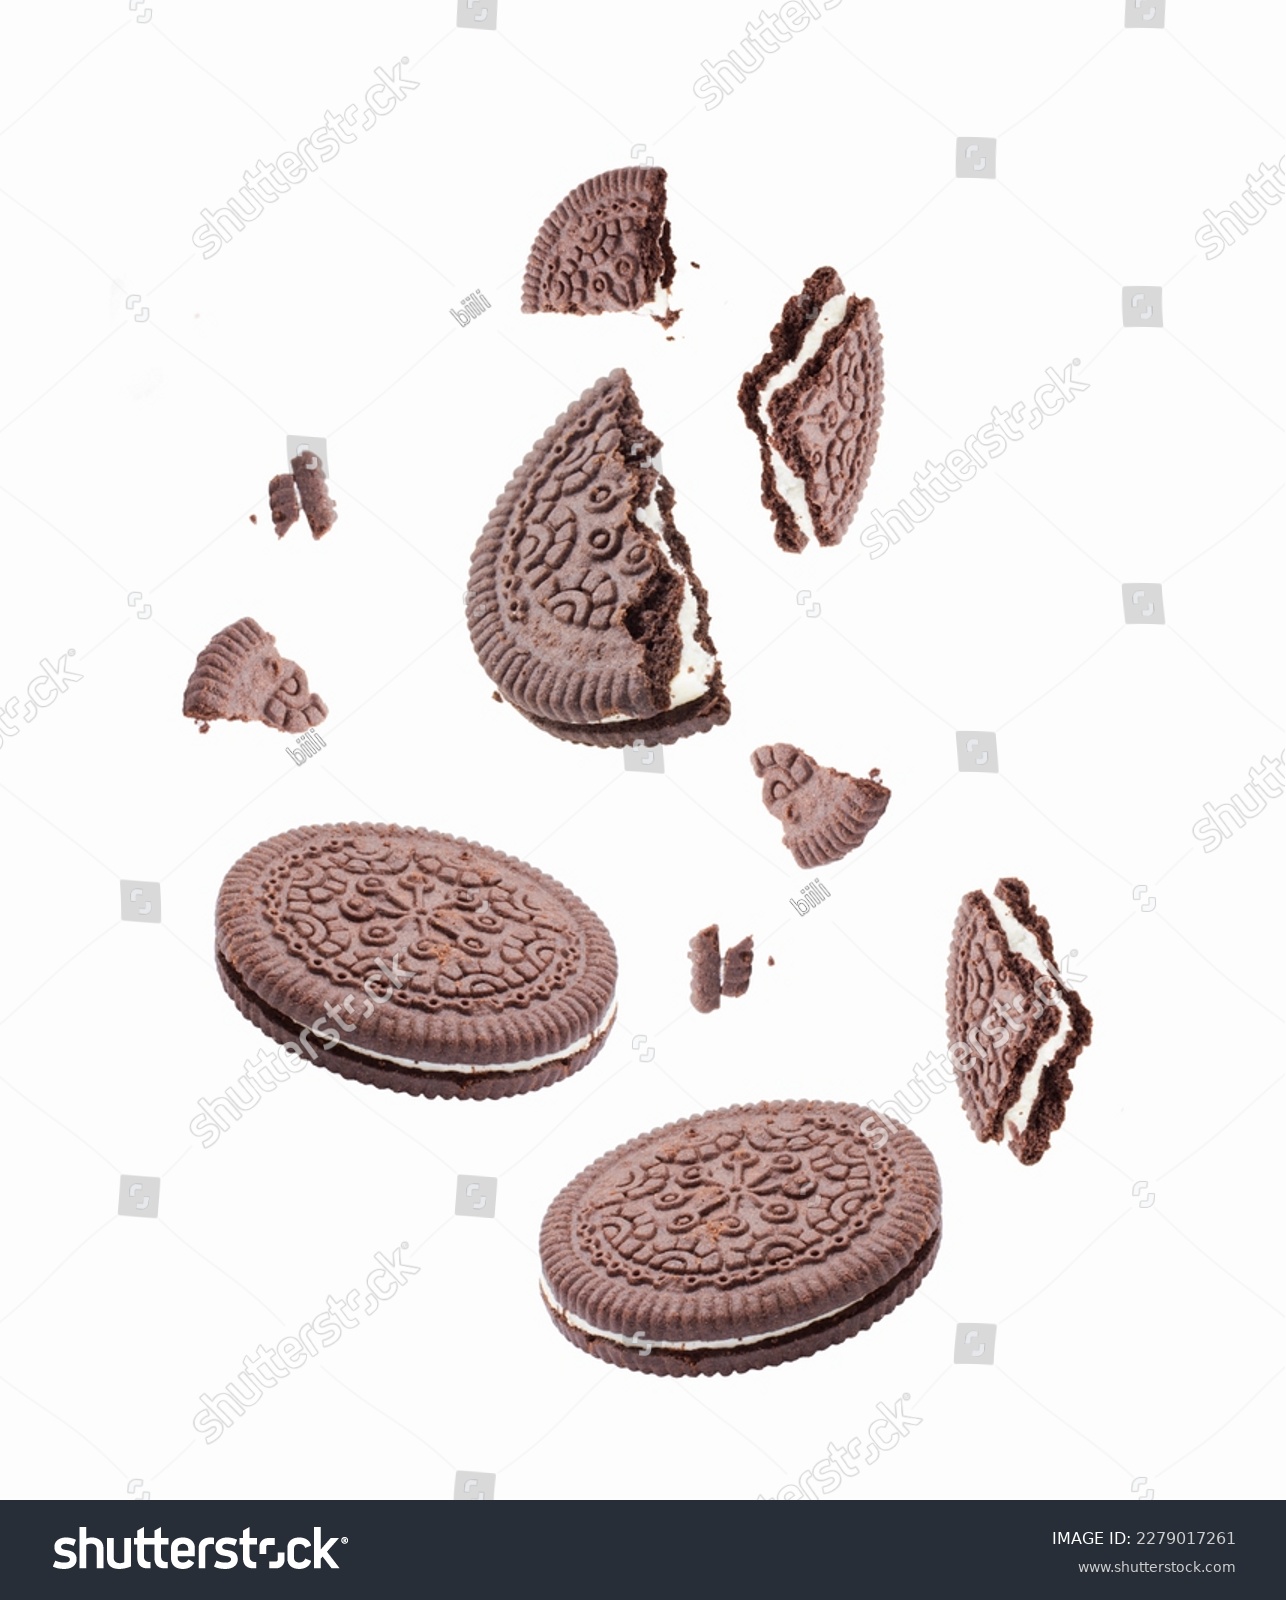 Chocolate cookies or biscuits, with  vanilla cream filling, falling on white background #2279017261